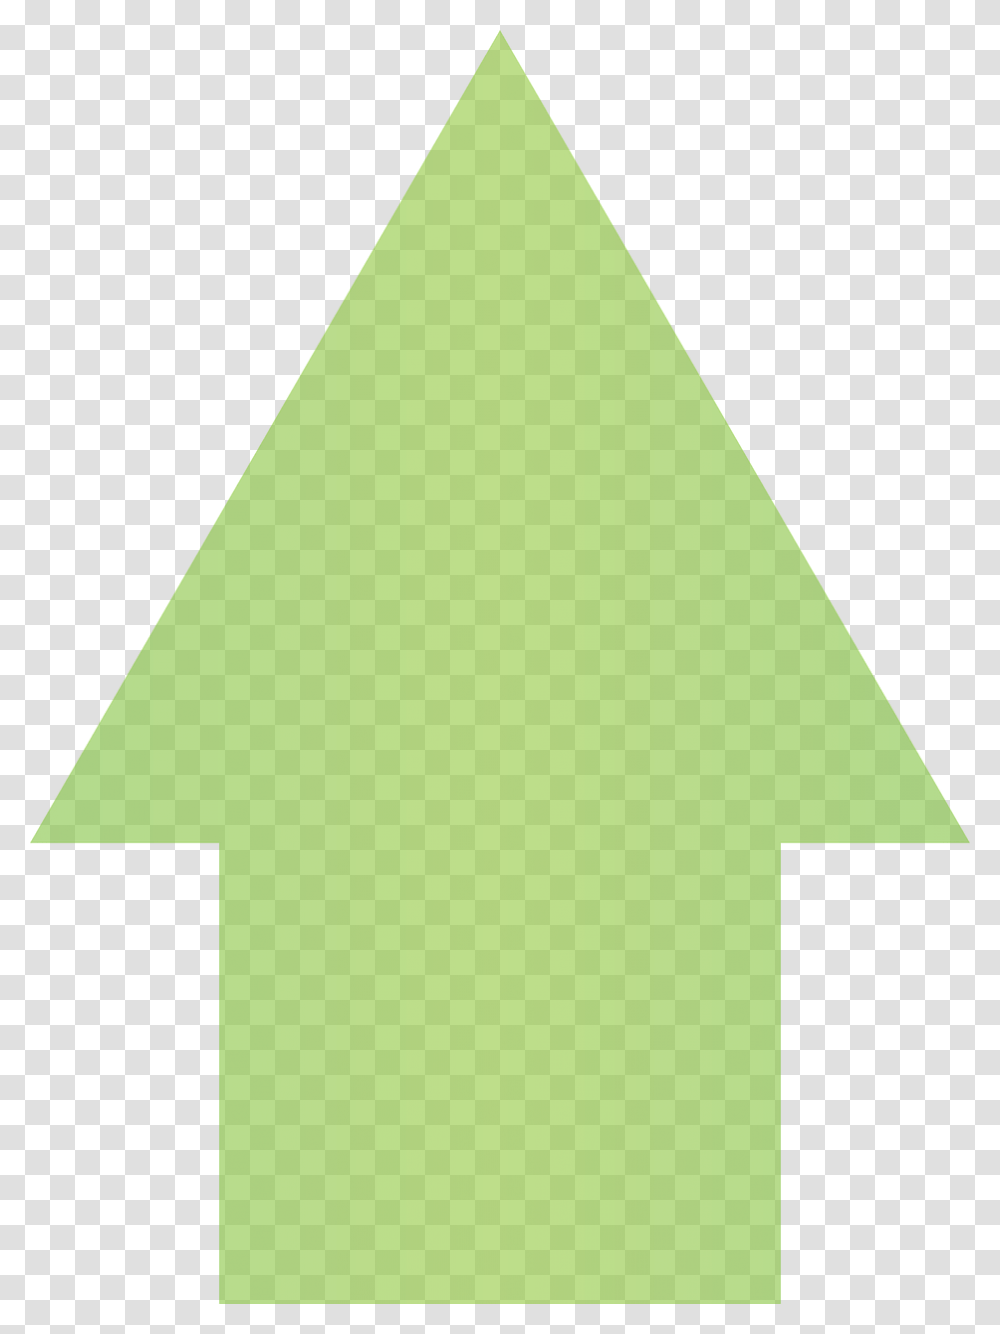 Up Upload Arrow Free Vector Graphic On Pixabay Green Background Arrow Up, Number, Symbol, Text, Triangle Transparent Png